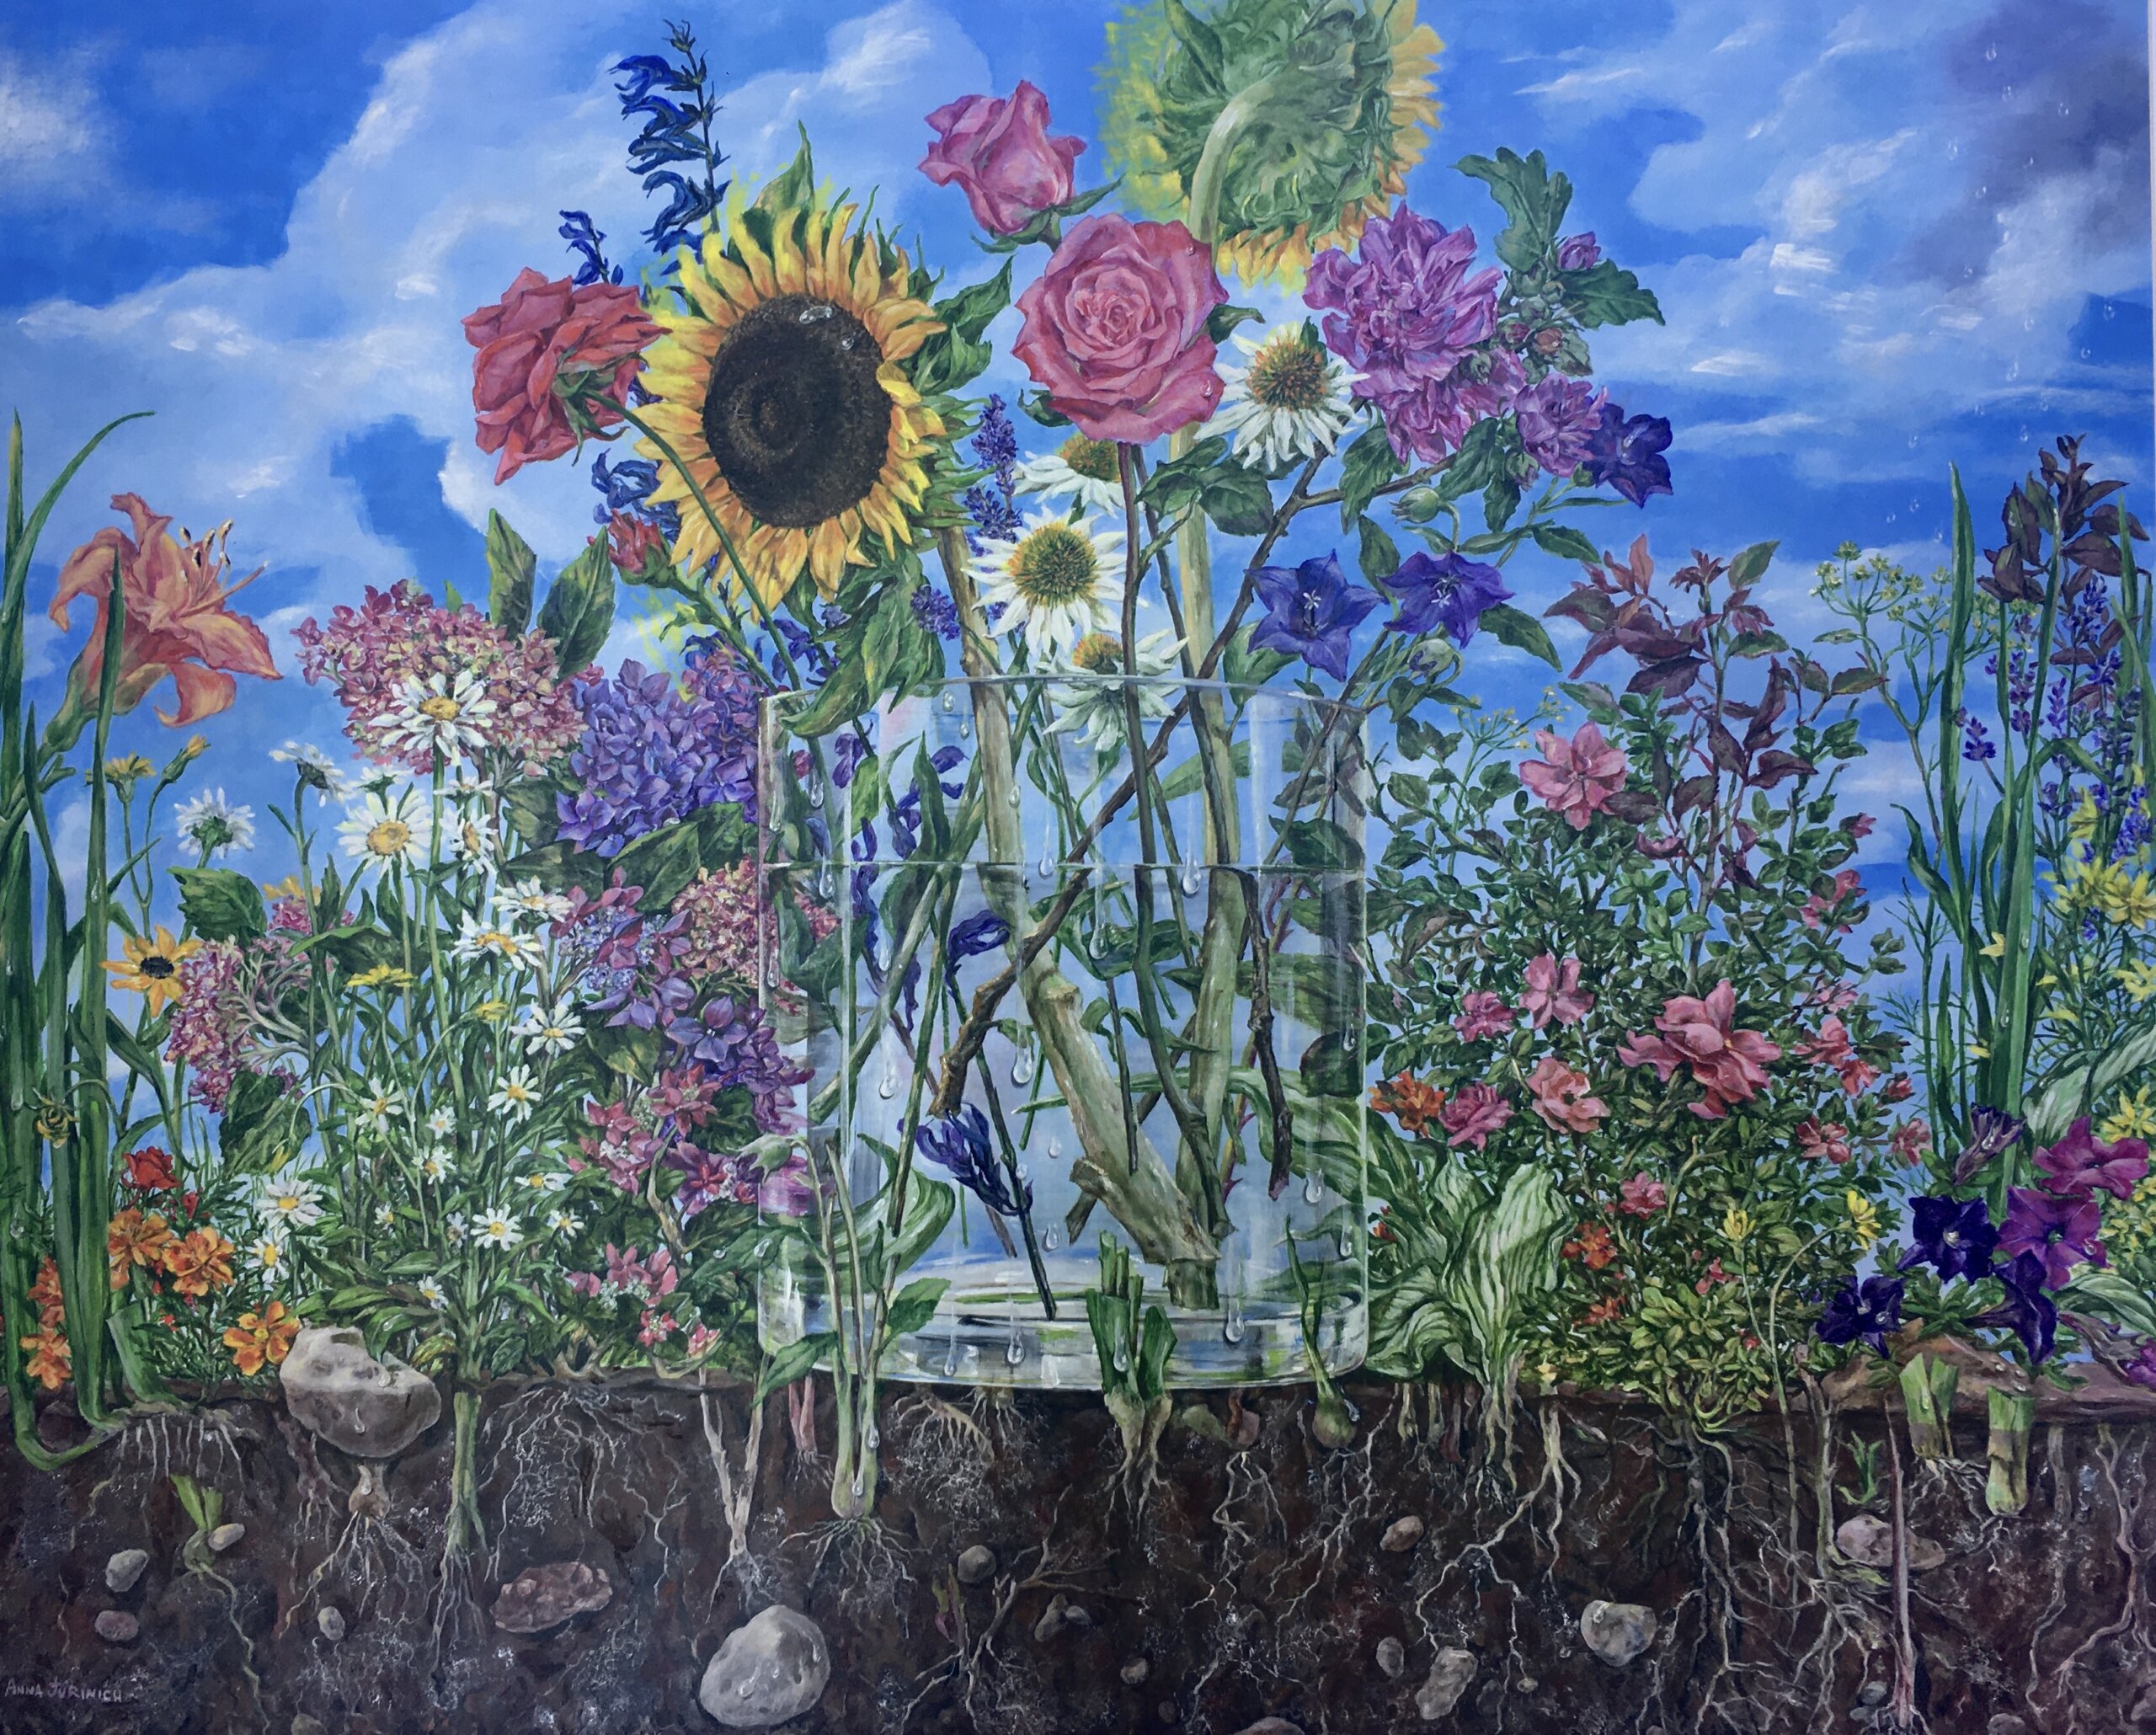 Anna Jurinich's "Picked Just for You" (acrylic, 28” x 35”) as seen cropped on the cover of Dan's Papers North Fork